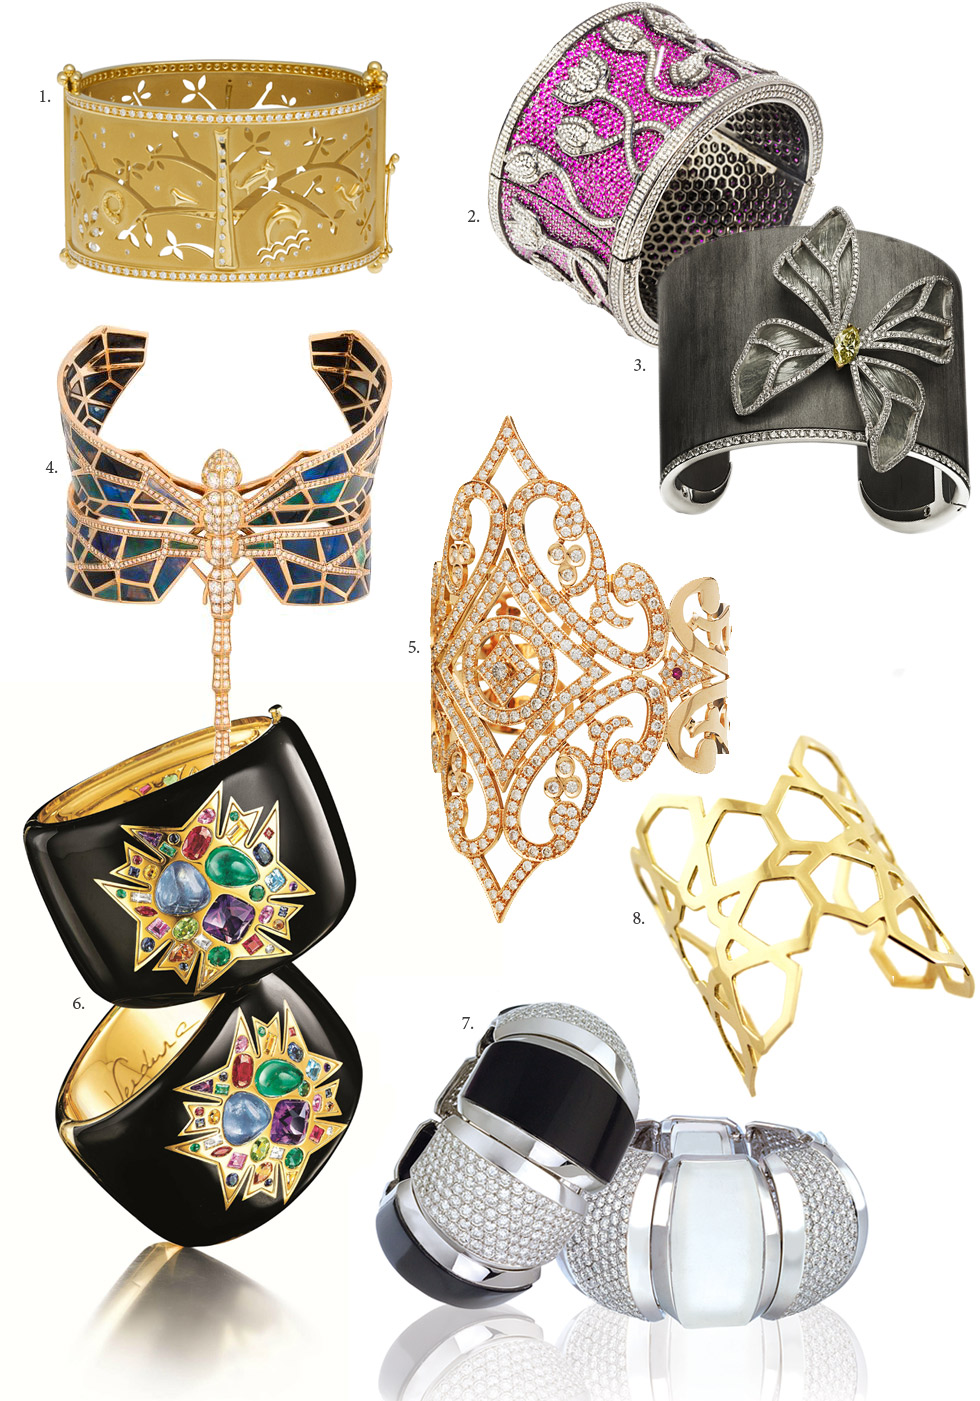 1. Temple St.Clair yellow gold and diamonds cuff; 2. Amrapali pink sapphire and diamond bracelet; 3. DOME carbon fiber set in white gold and diamond cuff; 4. NUUN Dragonfly bracelet with carved opal and diamonds set in rose gold; 5. Dori Mouzannar for A&W Mouzannar diamond bracelet set in rose gold; 6. Verdura Theodora cuffs in 18k gold with enamel and multi-coloured gemstones; 7. Hammerman Brothers cuffs with frosted quartz, onyx and diamonds set in white gold; 8. Ralph Masri 18K yellow gold Arabesque Deco cuff